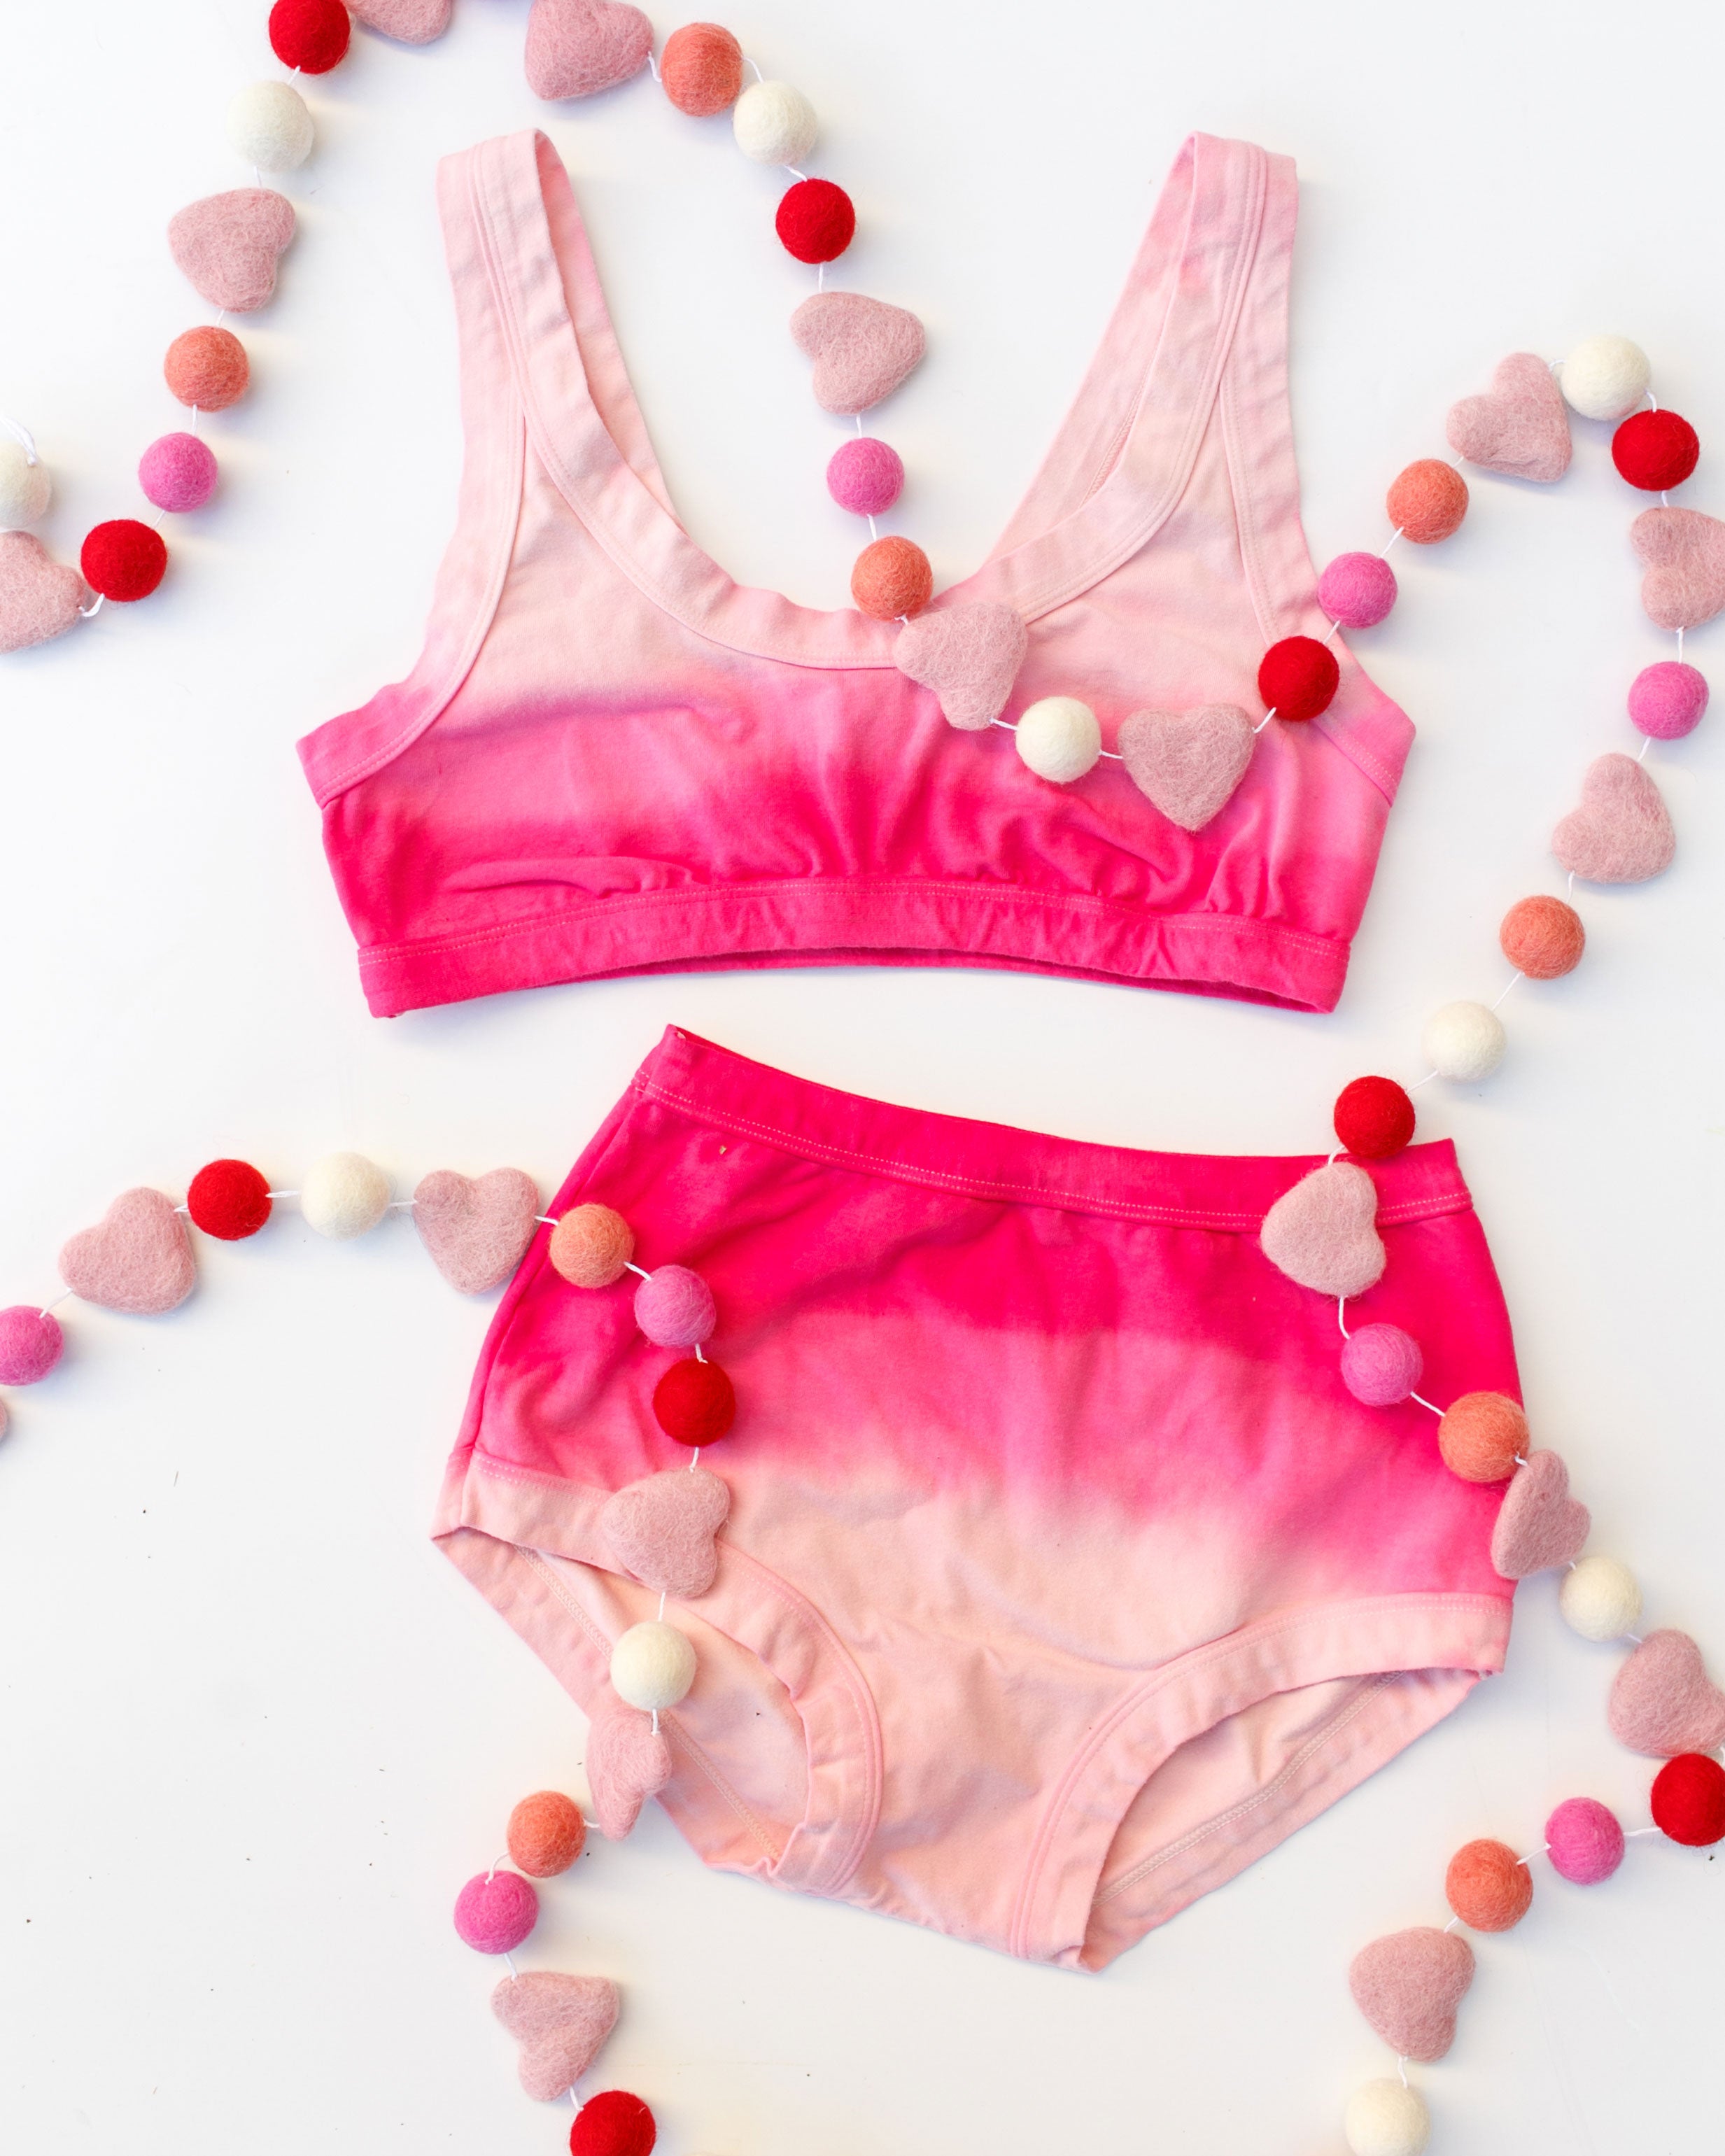 Flat lay of Thunderpants organic cotton Bralette and Original underwear in Valentine's Day Dip Dye ombre pinks with heart garland.